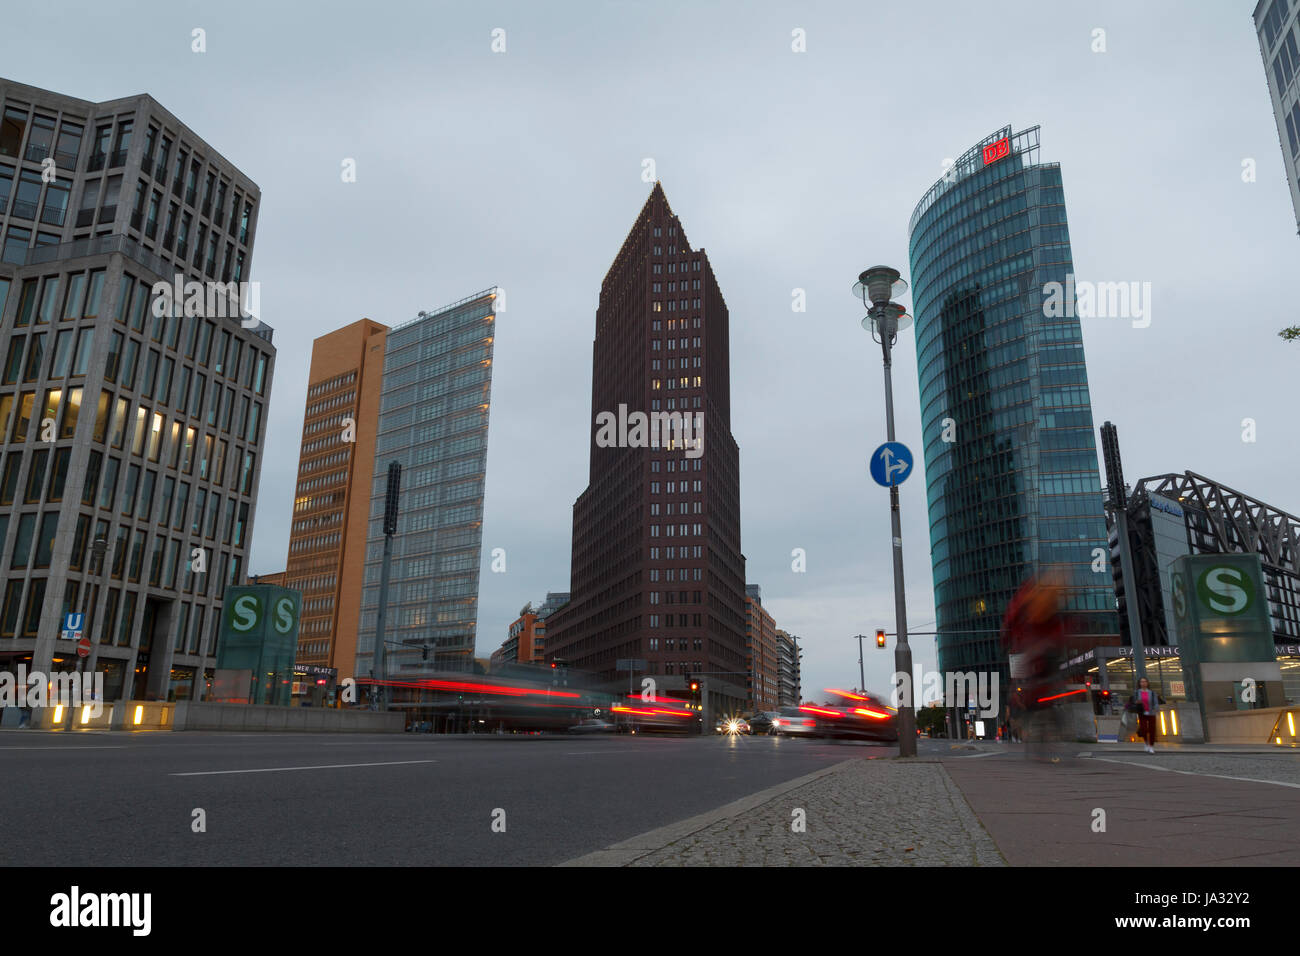 The Potsdamer Platz, an important public square and traffic intersection in the center of Berlin, with modern architec Stock Photo